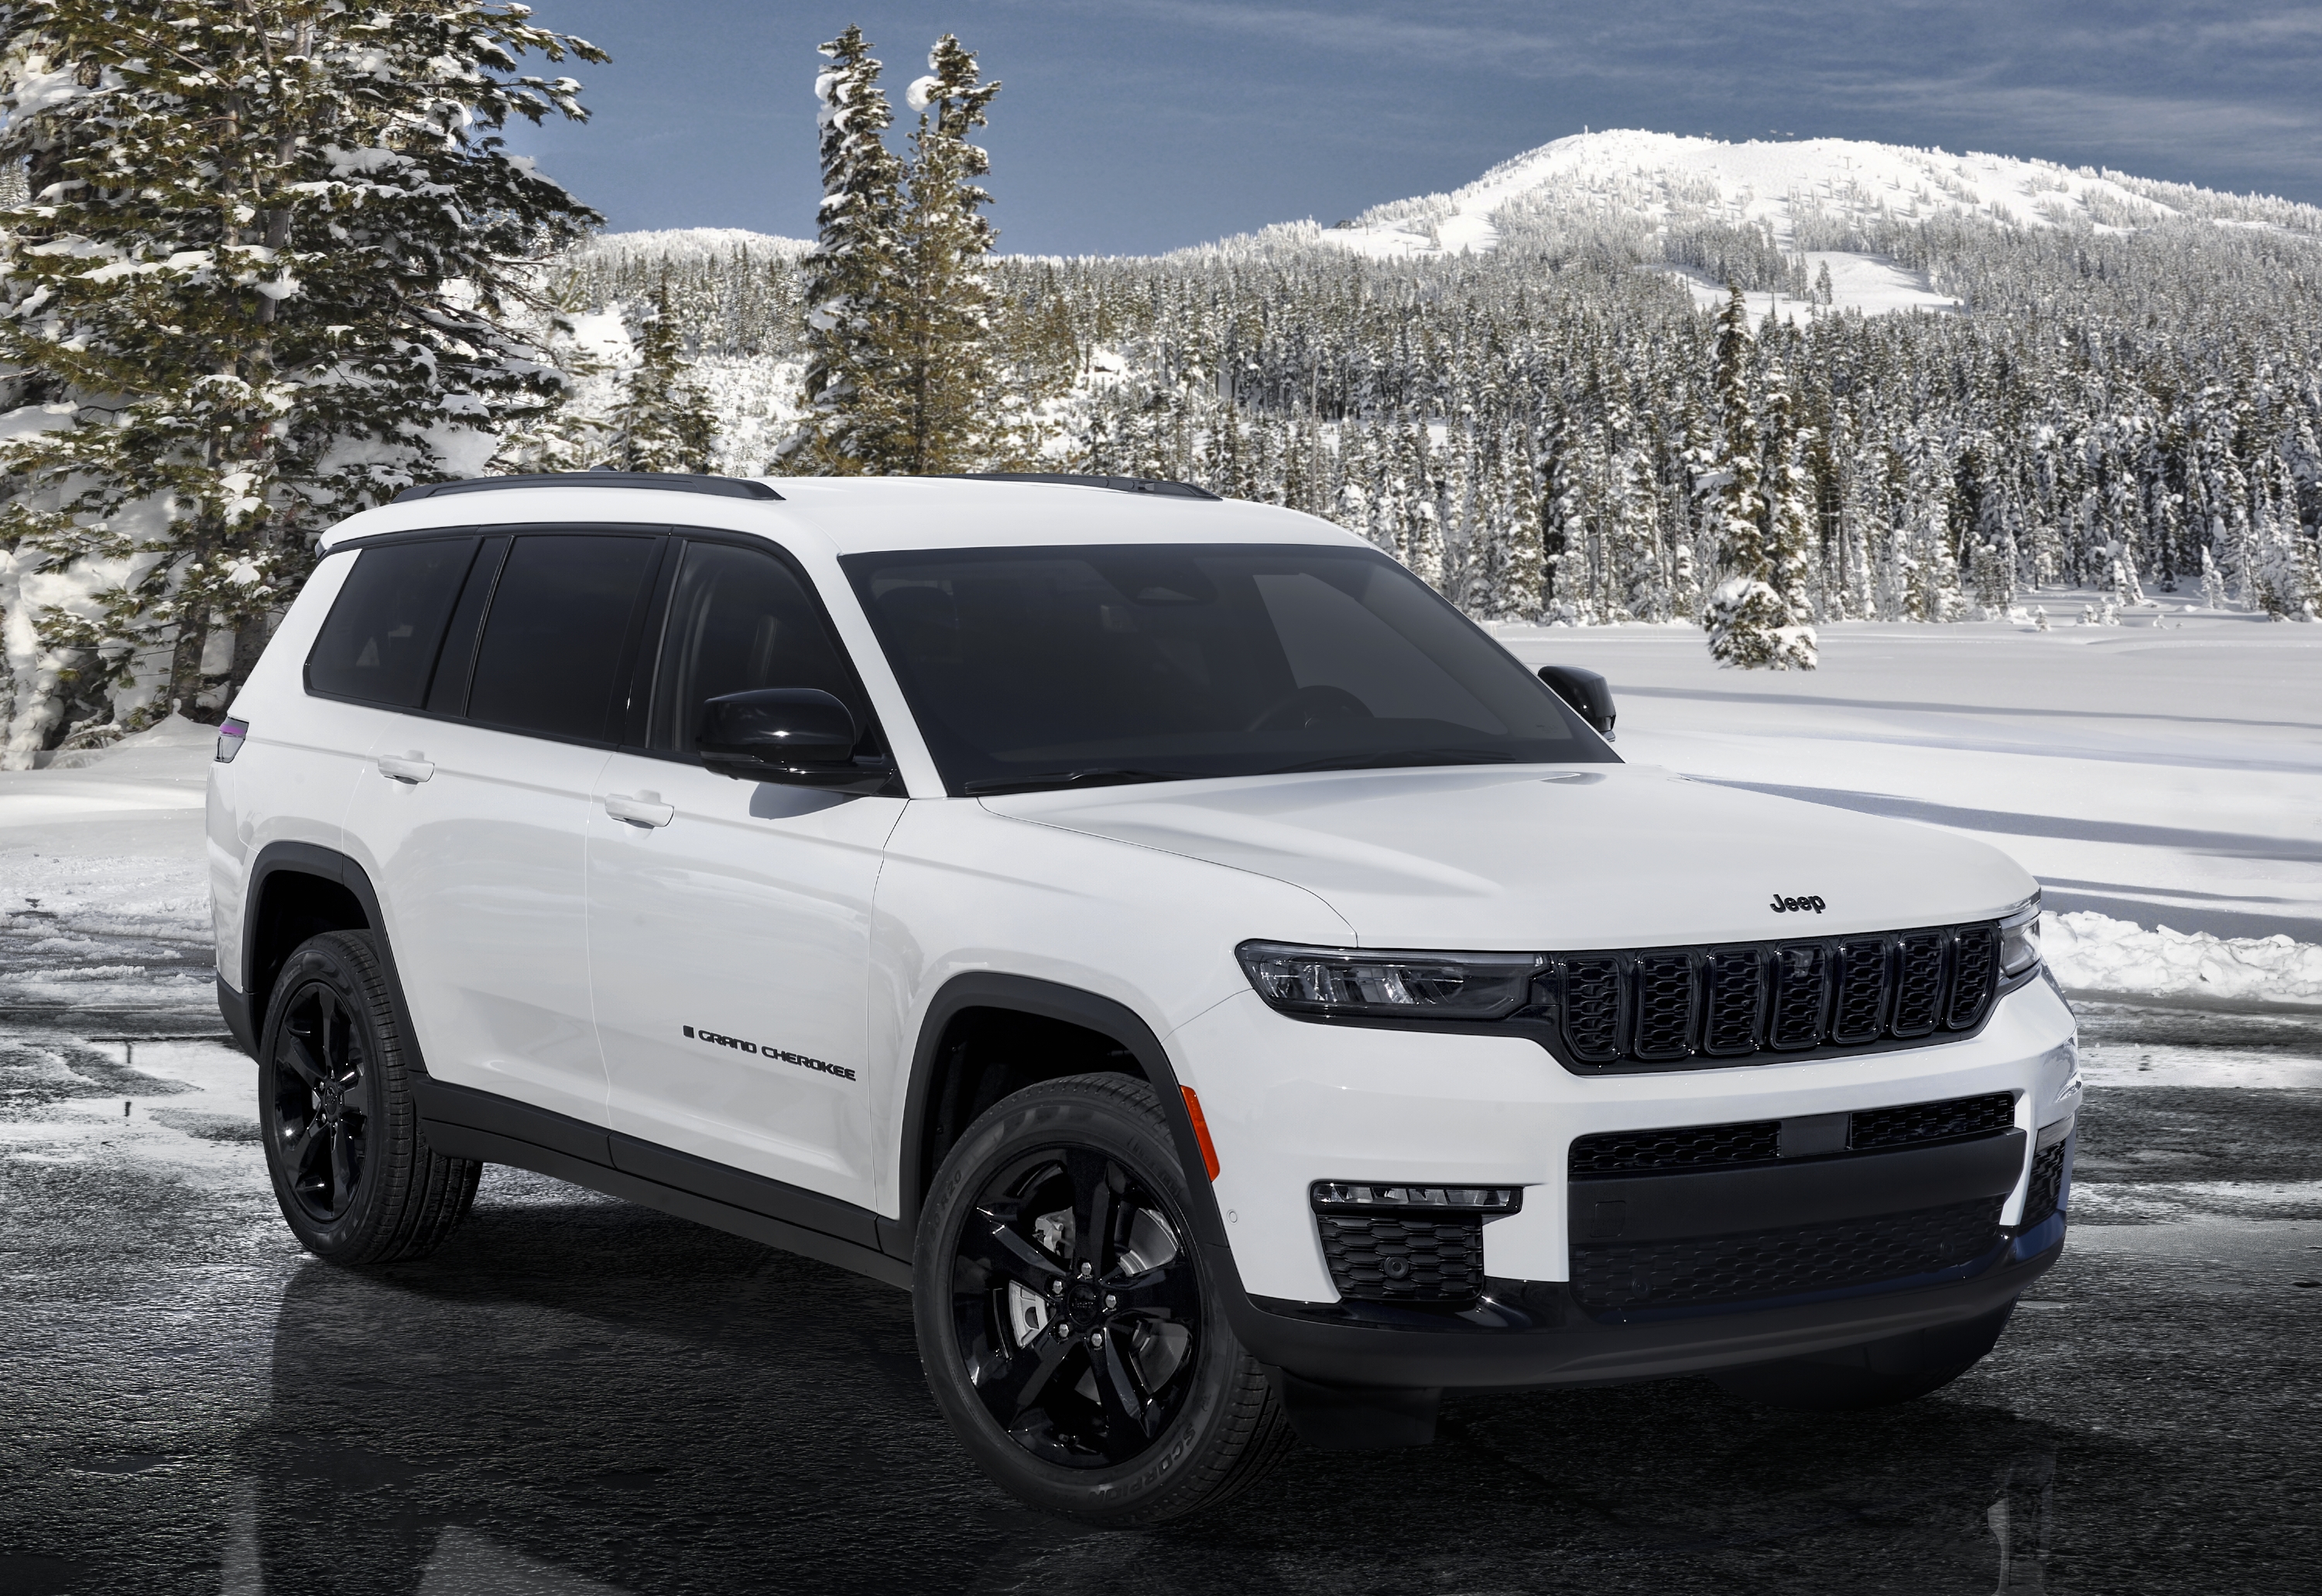 Meet the Grand Cherokee L’s New Limited Black Package